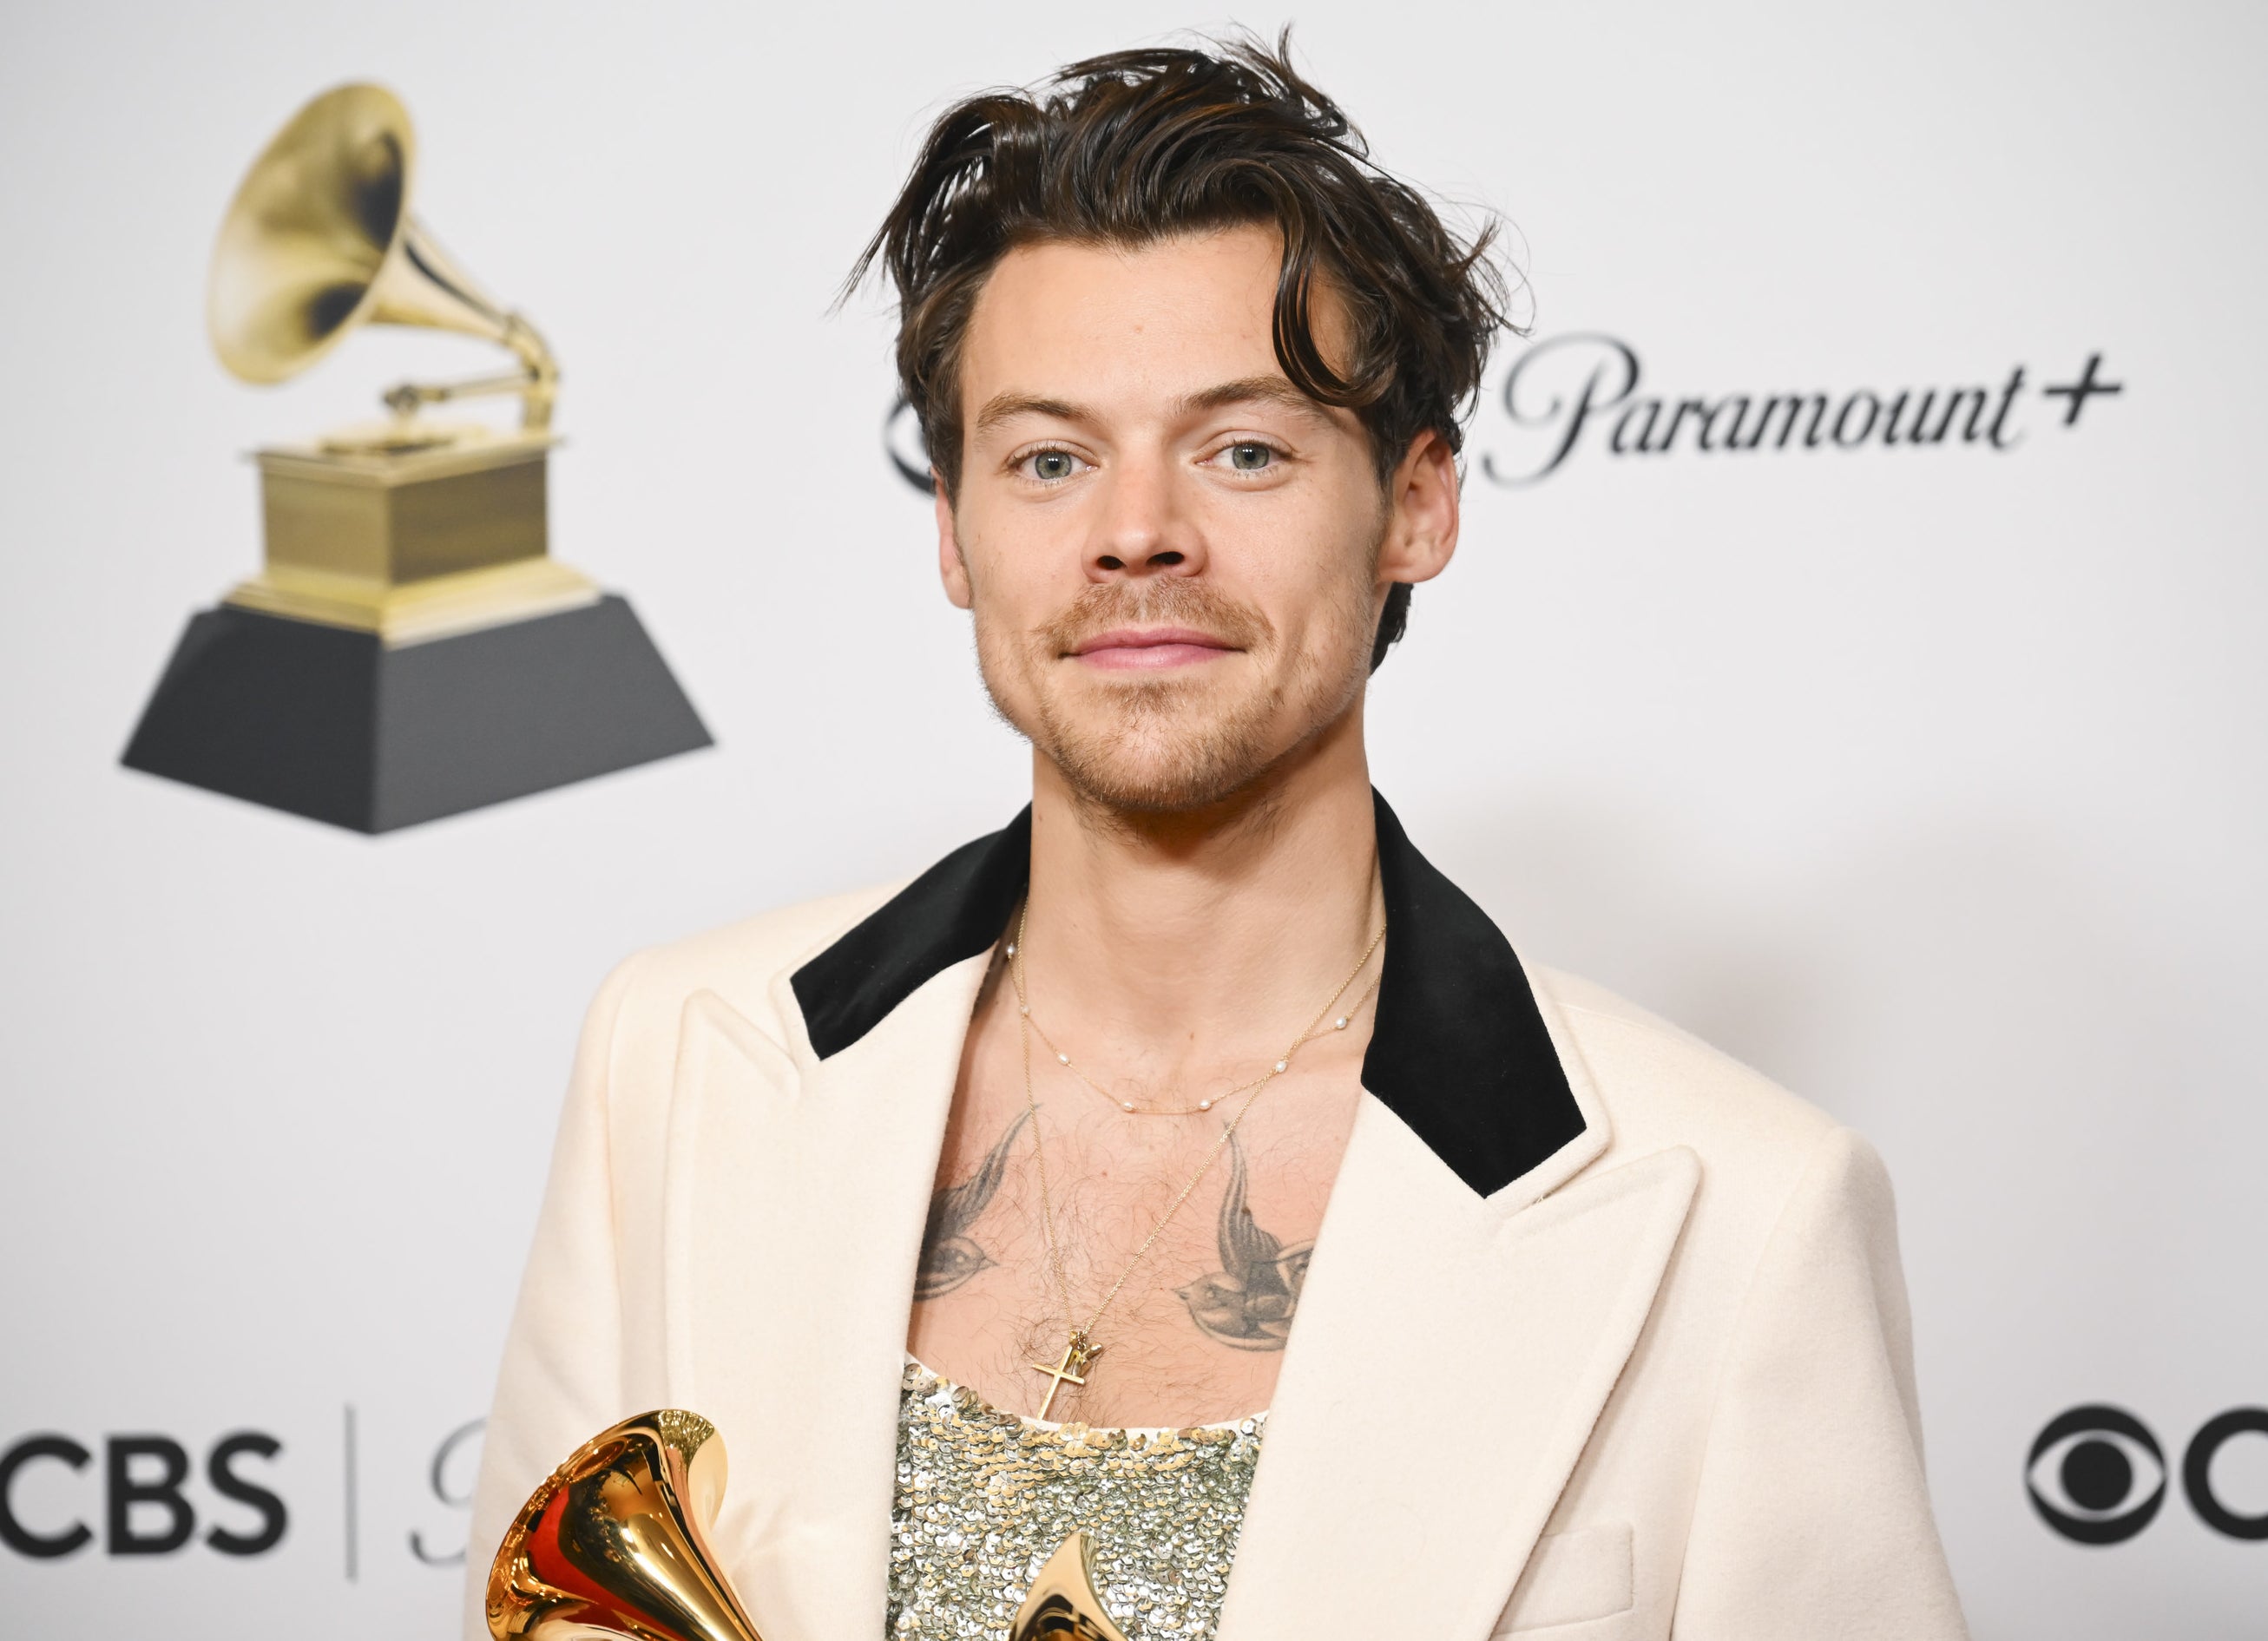 A close-up of Harry holding a Grammy